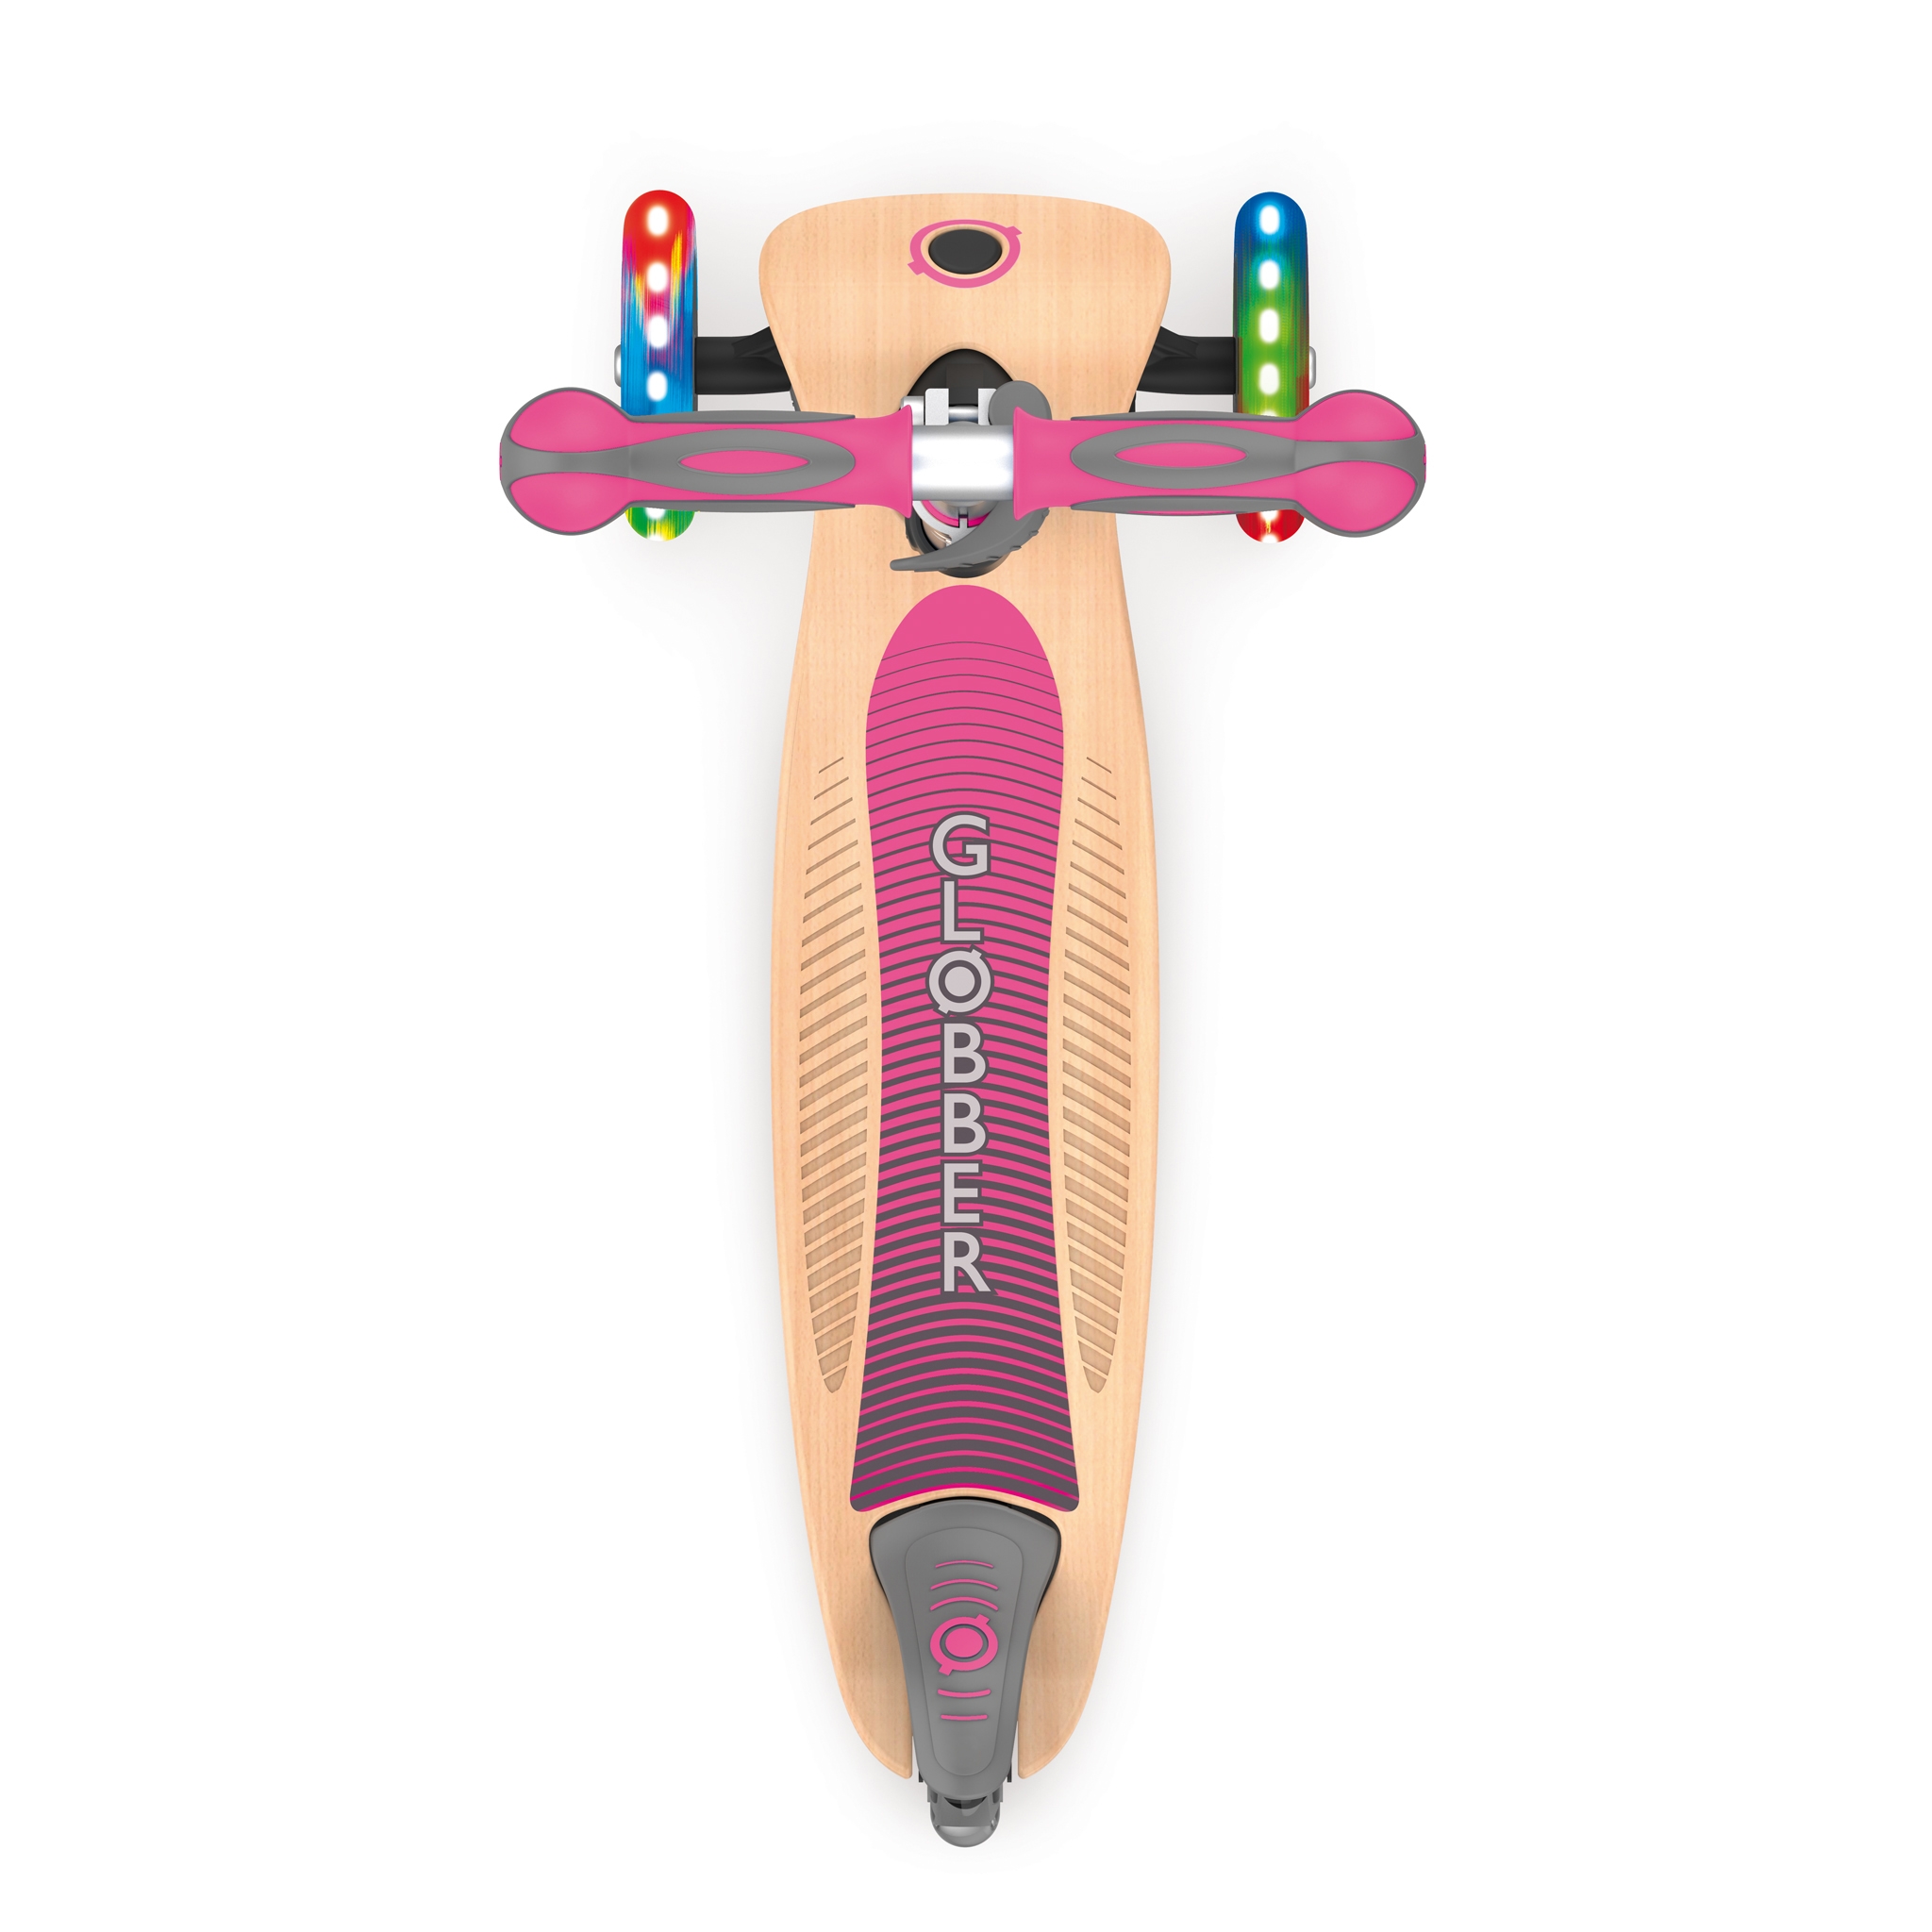 PRIMO-FOLDABLE-WOOD-LIGHTS-3-wheel-with-7-ply-wooden-scooter-deck-and-laser-engraved-sides-on-the-deck_deep-pink 3